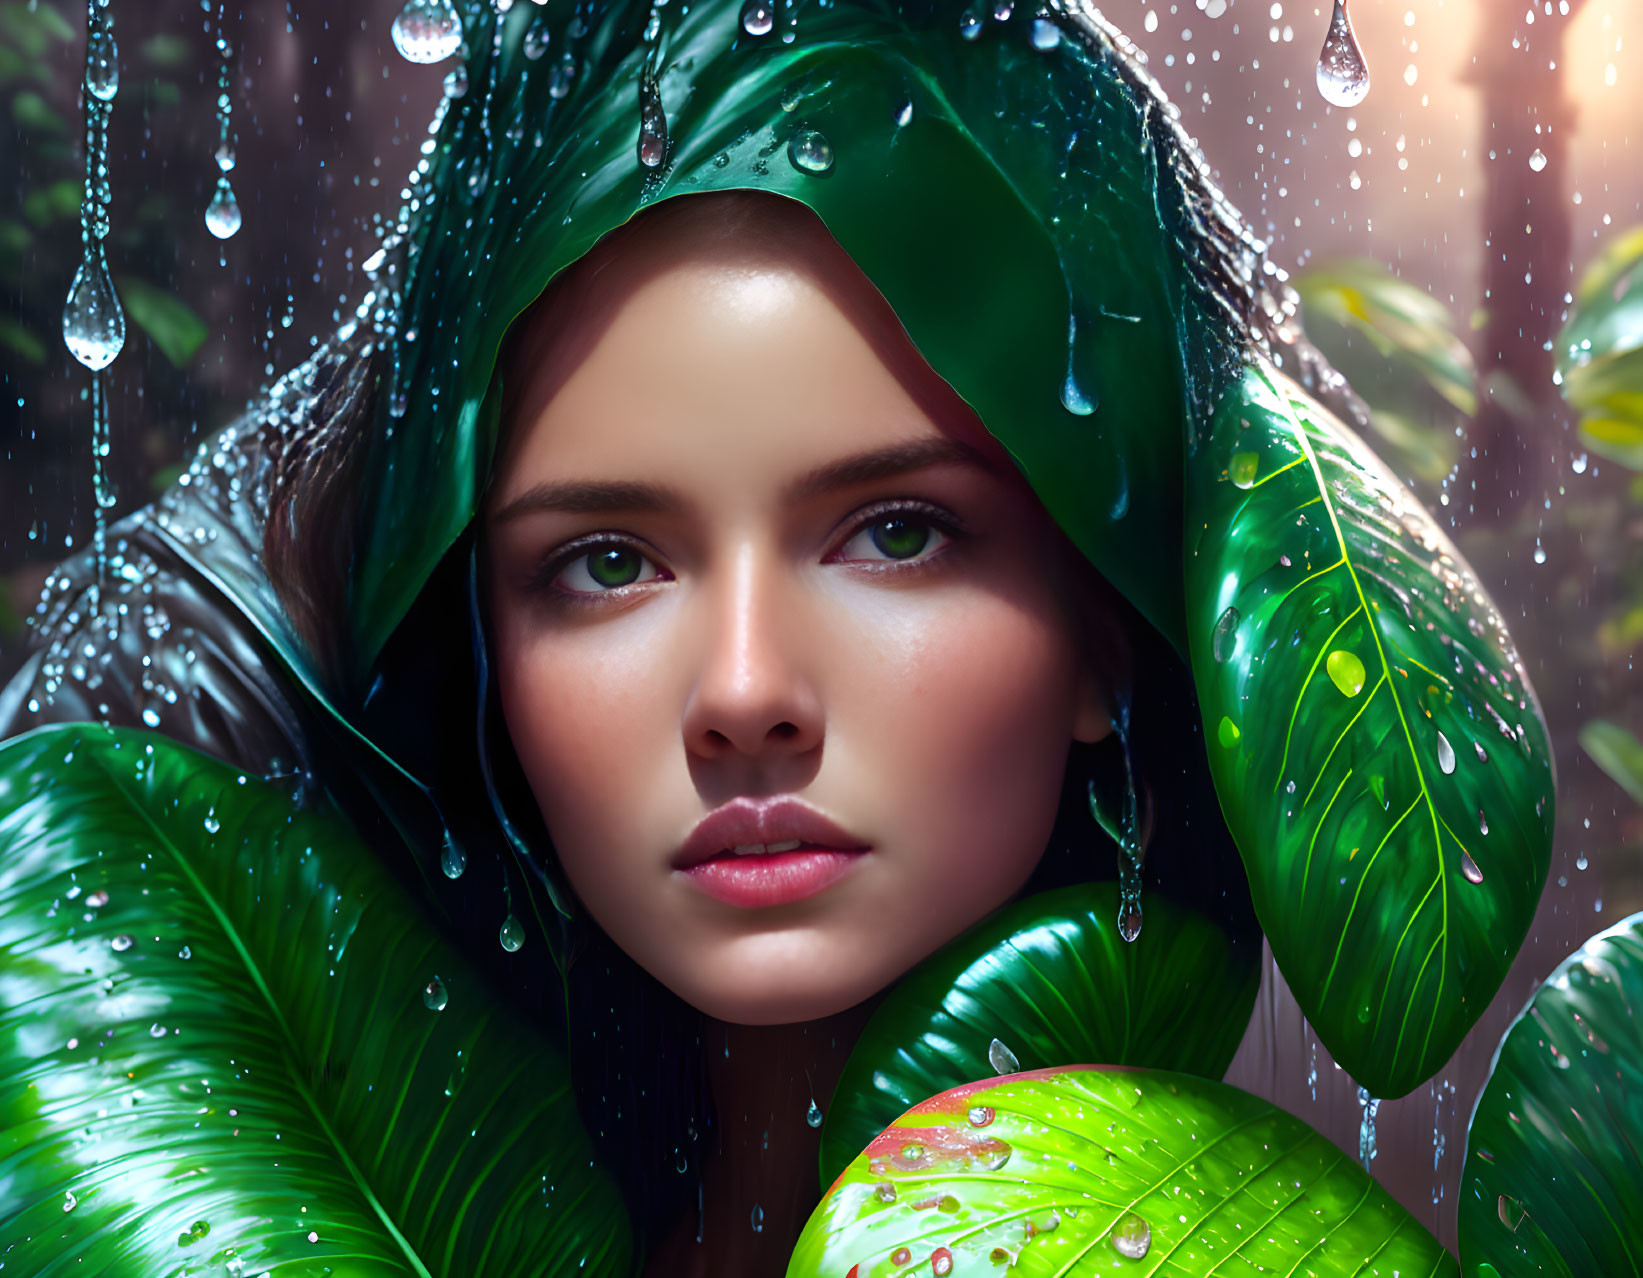 Serene young woman portrait with glossy green leaves and water droplets